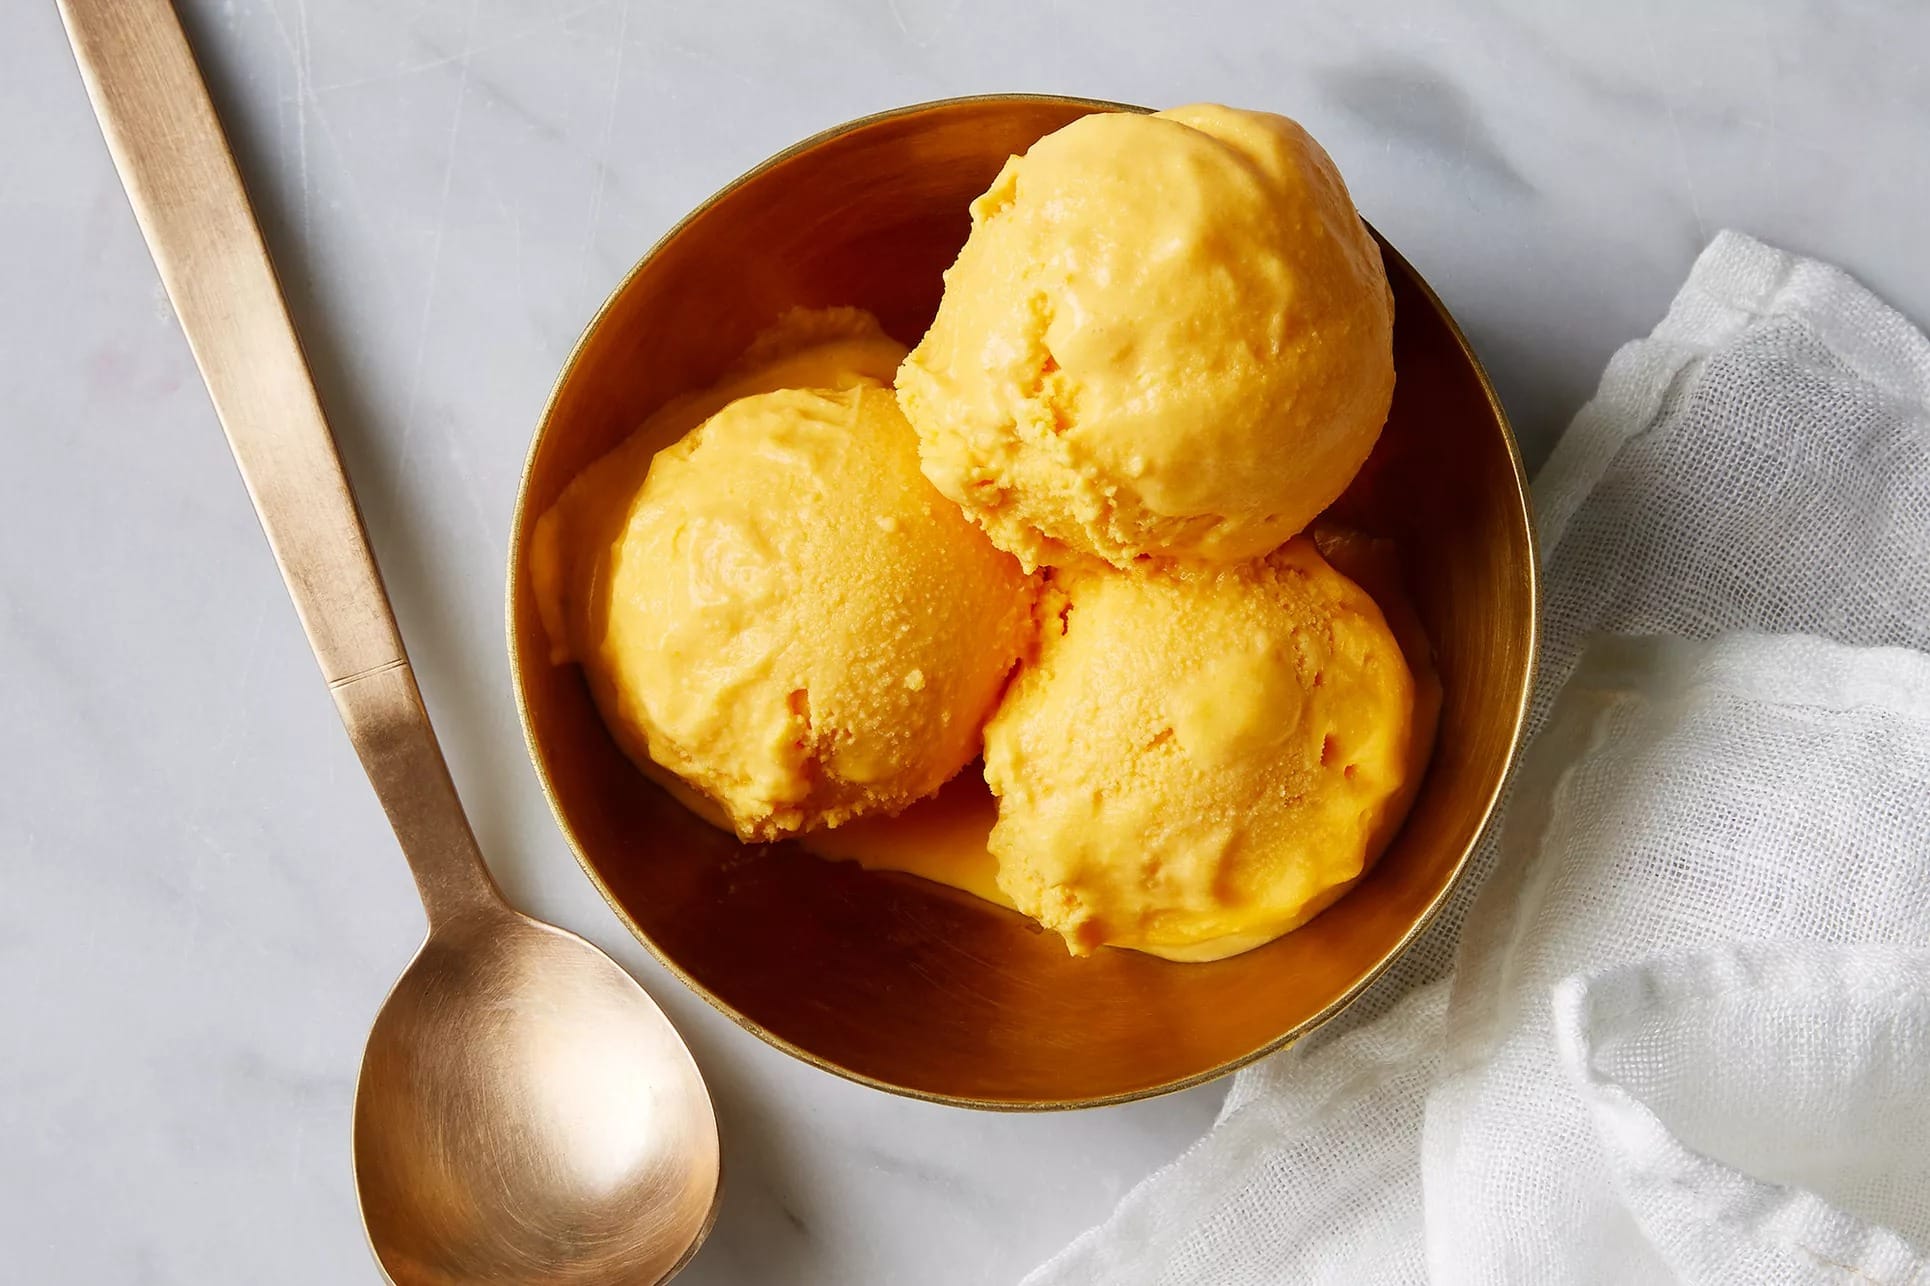 Three scoops of homemade Carrot Ice Cream on a stainless bowl